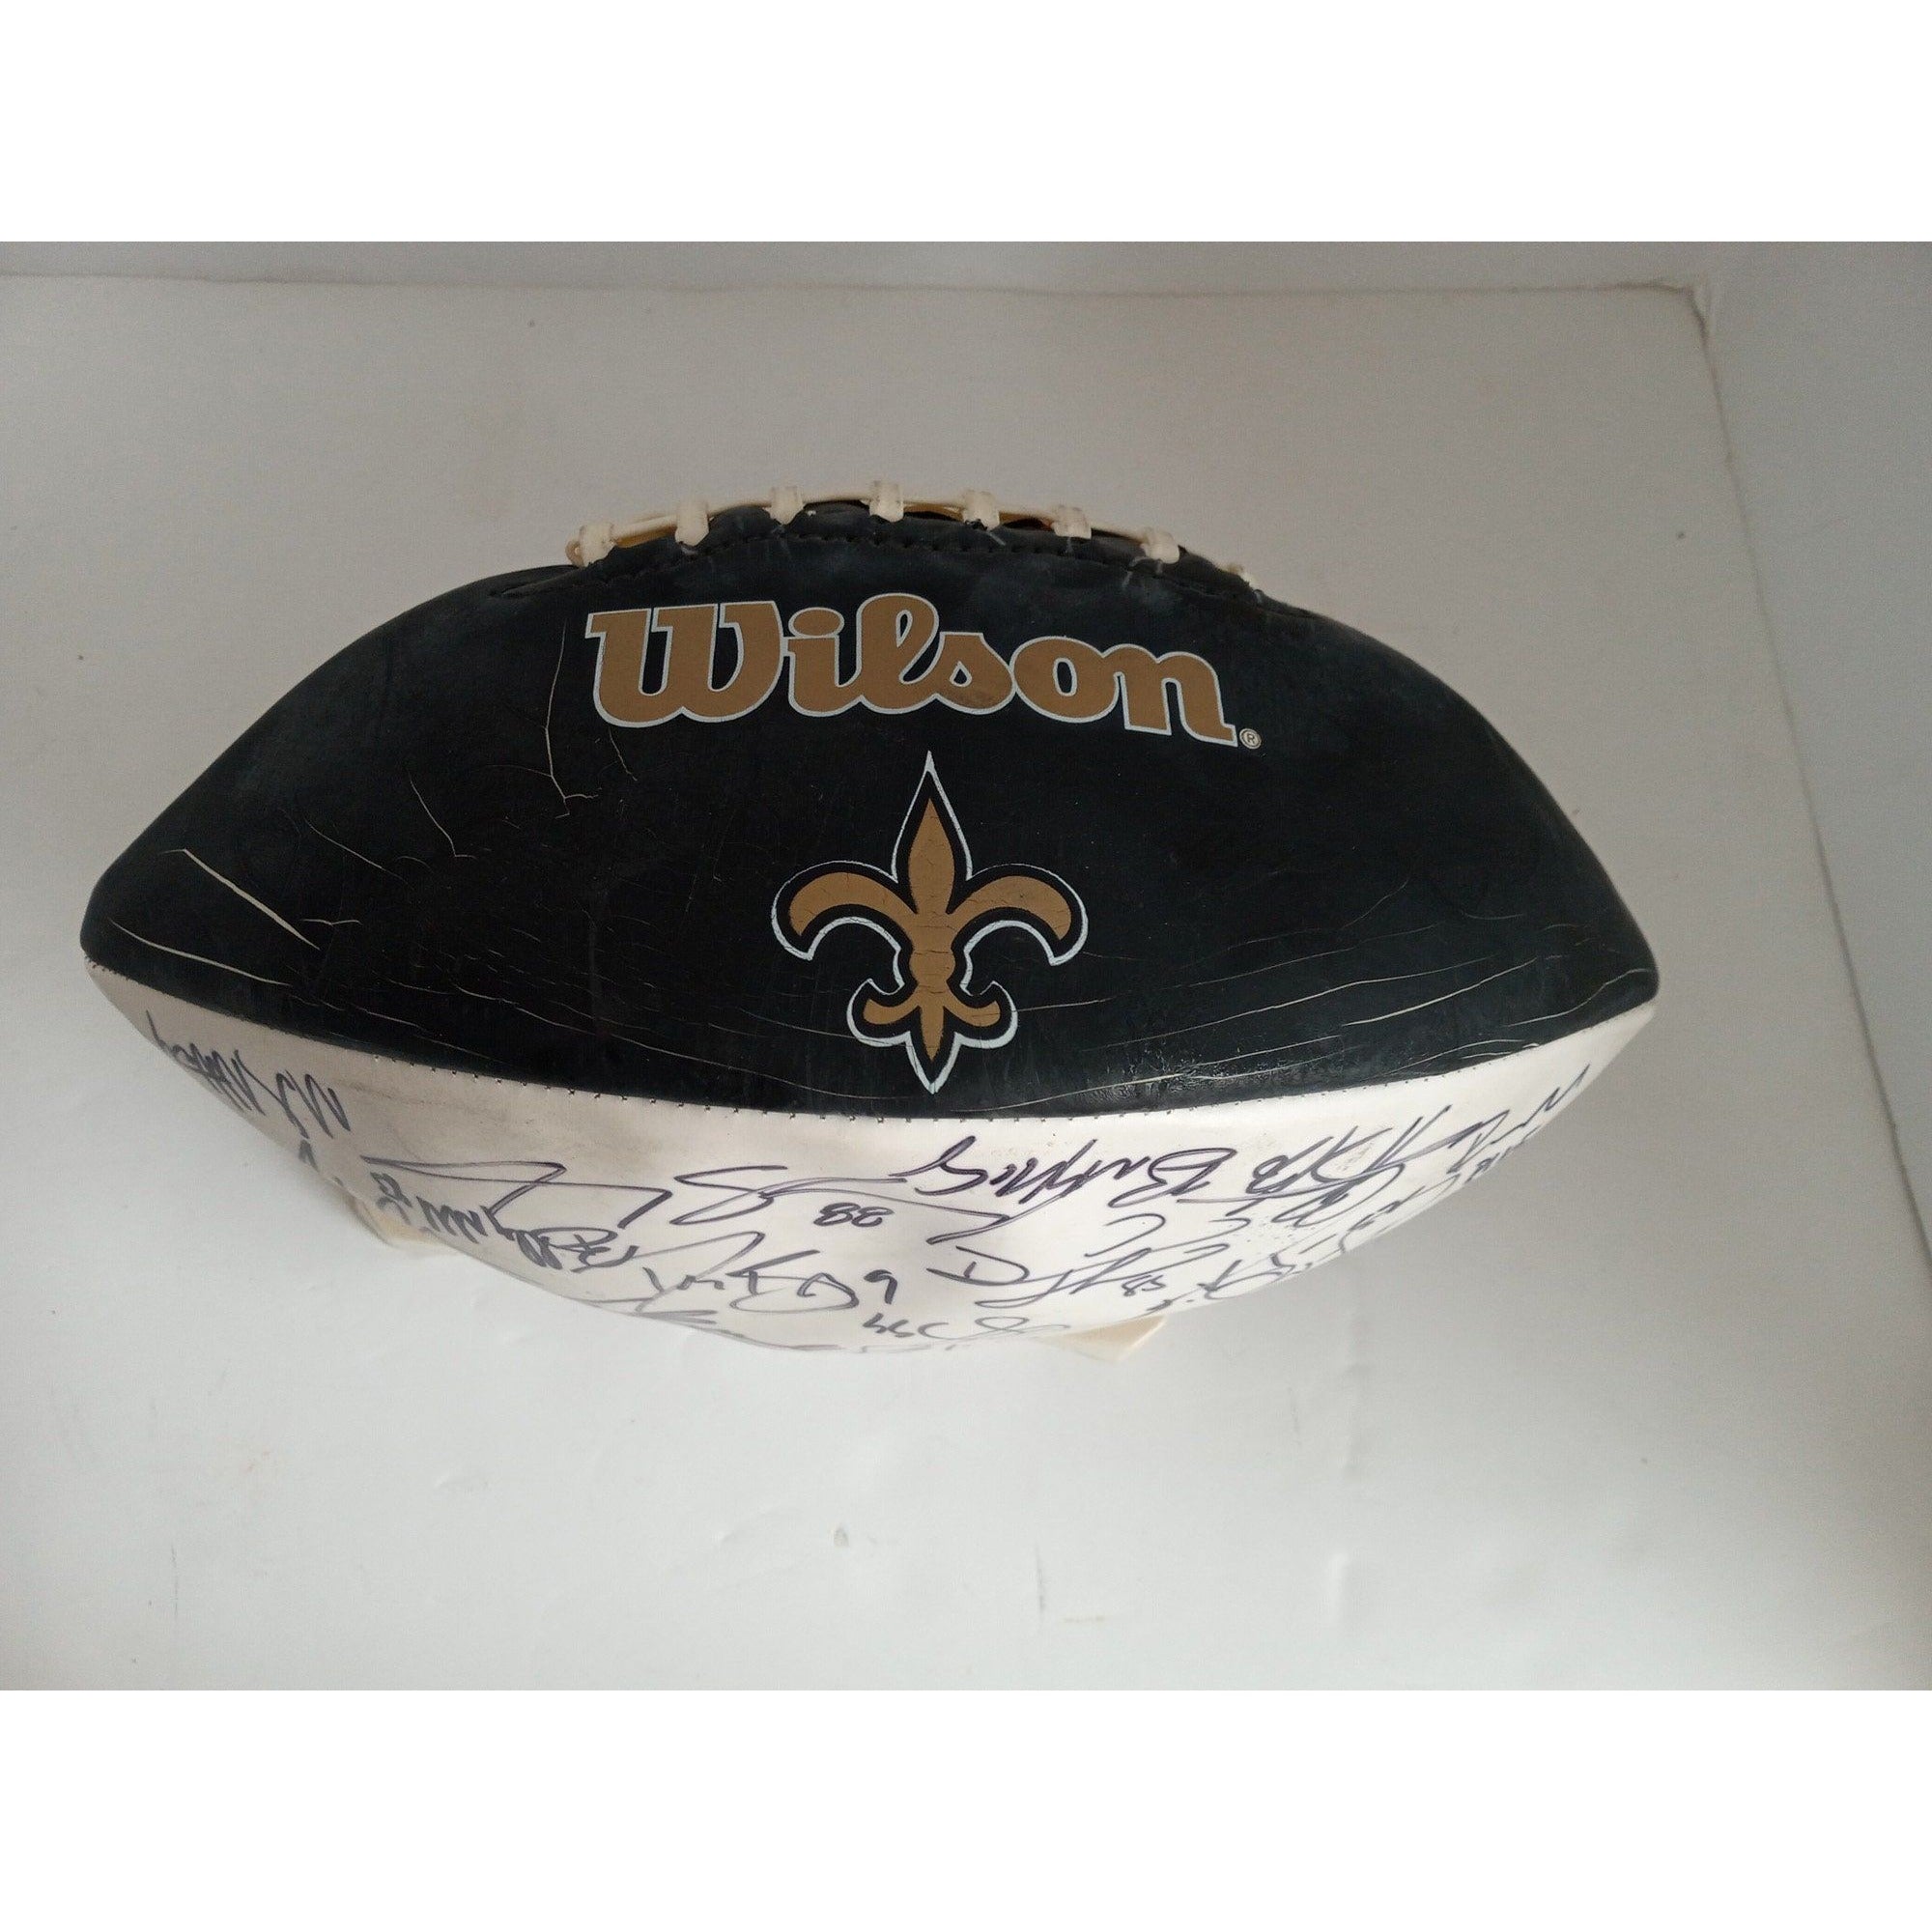 Drew Brees, Sean Payton, New Orleans Saints Super Bowl champs team signed football with proof